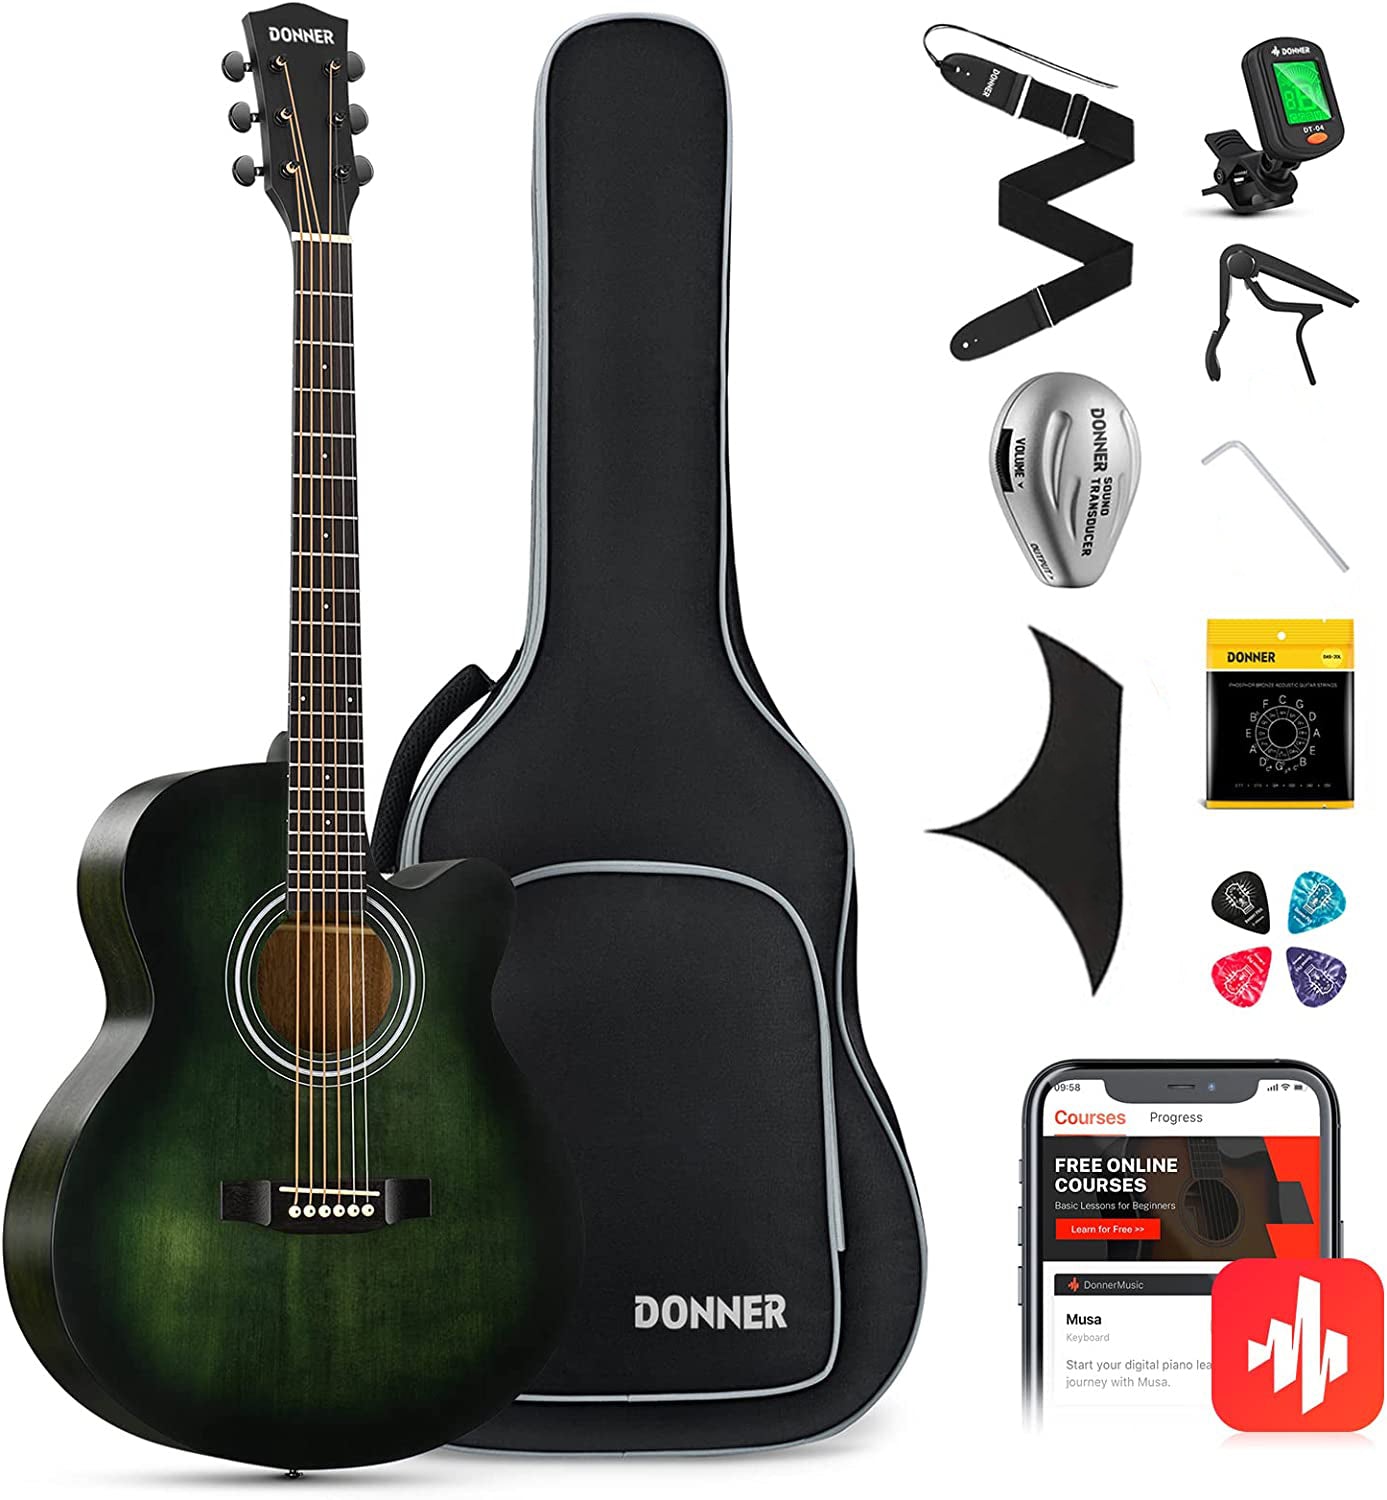 

Donner 40 Inch Beginner Acoustic Guitar Cutaway Acustica Guitarra Bundle Kit with Pickup Free Online Lesson Bag Tuner Capo Strap Mini Jumbo for Adult Travel Teen Right Hand Green DAJ-110CD